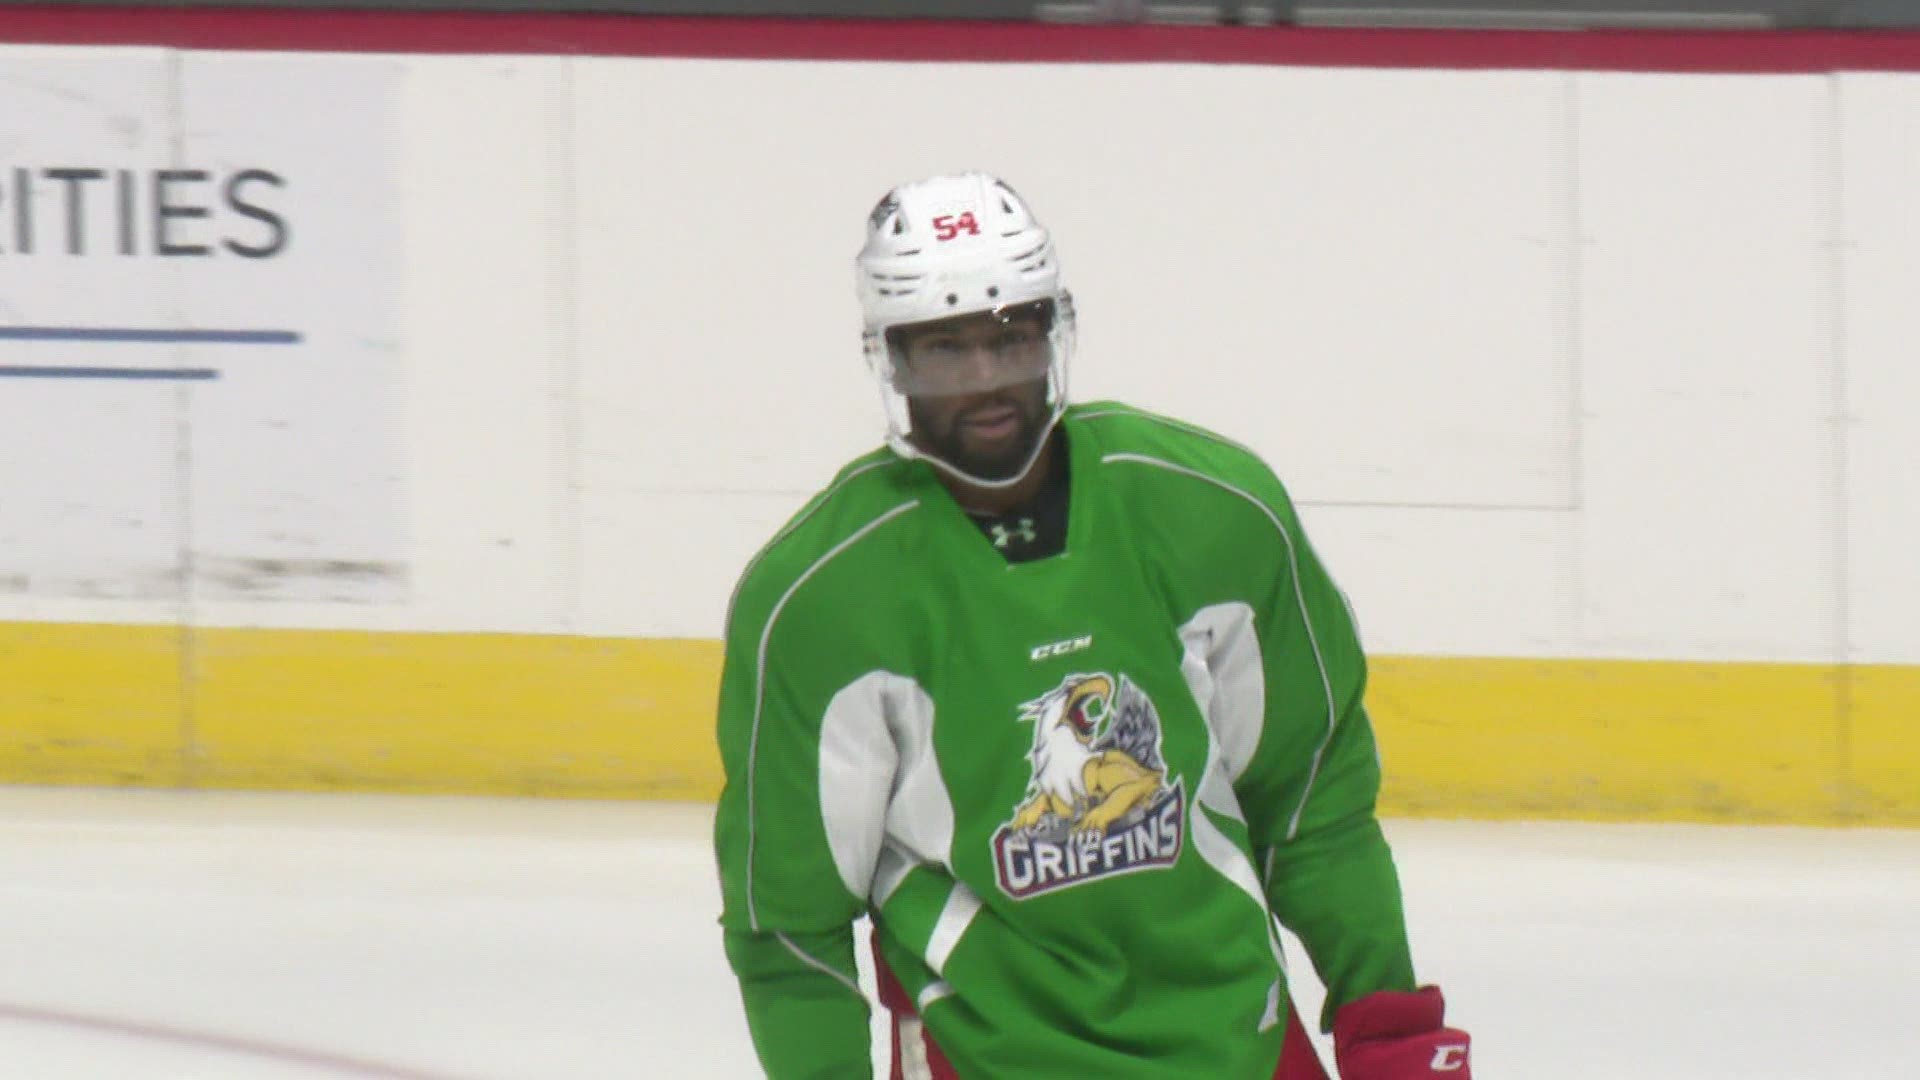 Smith's experiences with racism in hockey have motivated him to help bring change.